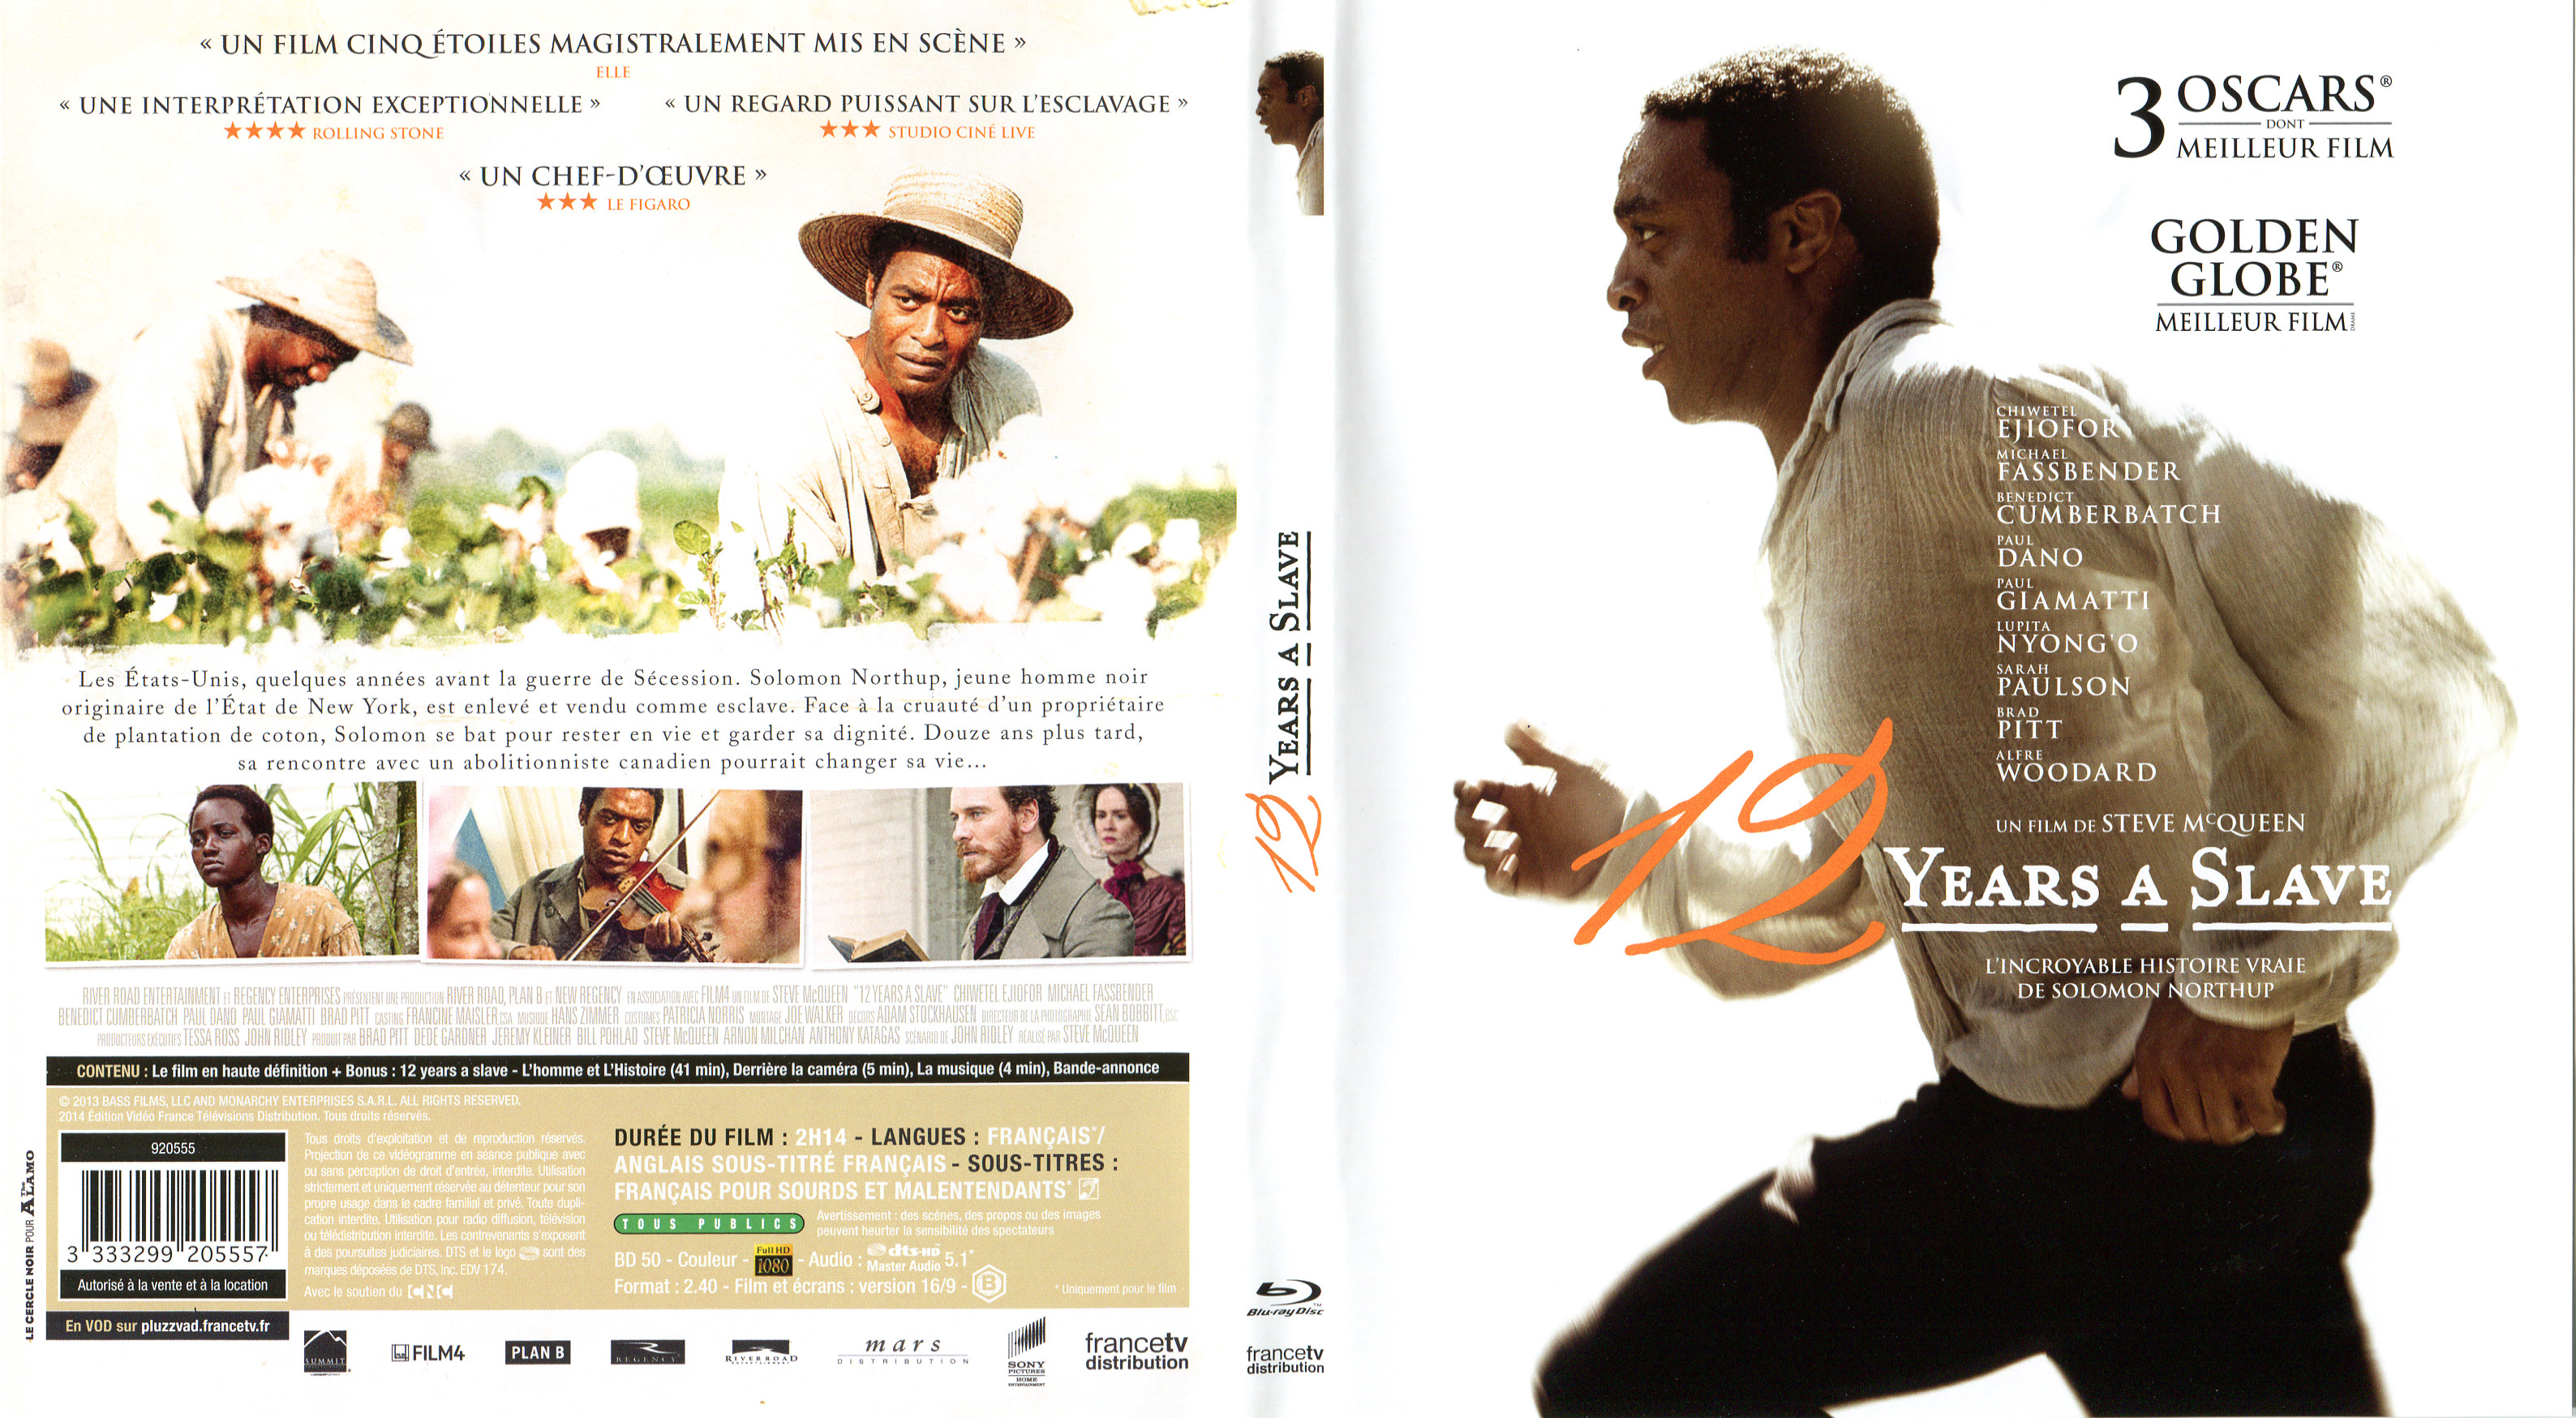 Jaquette DVD 12 Years a Slave (BLU-RAY) v2